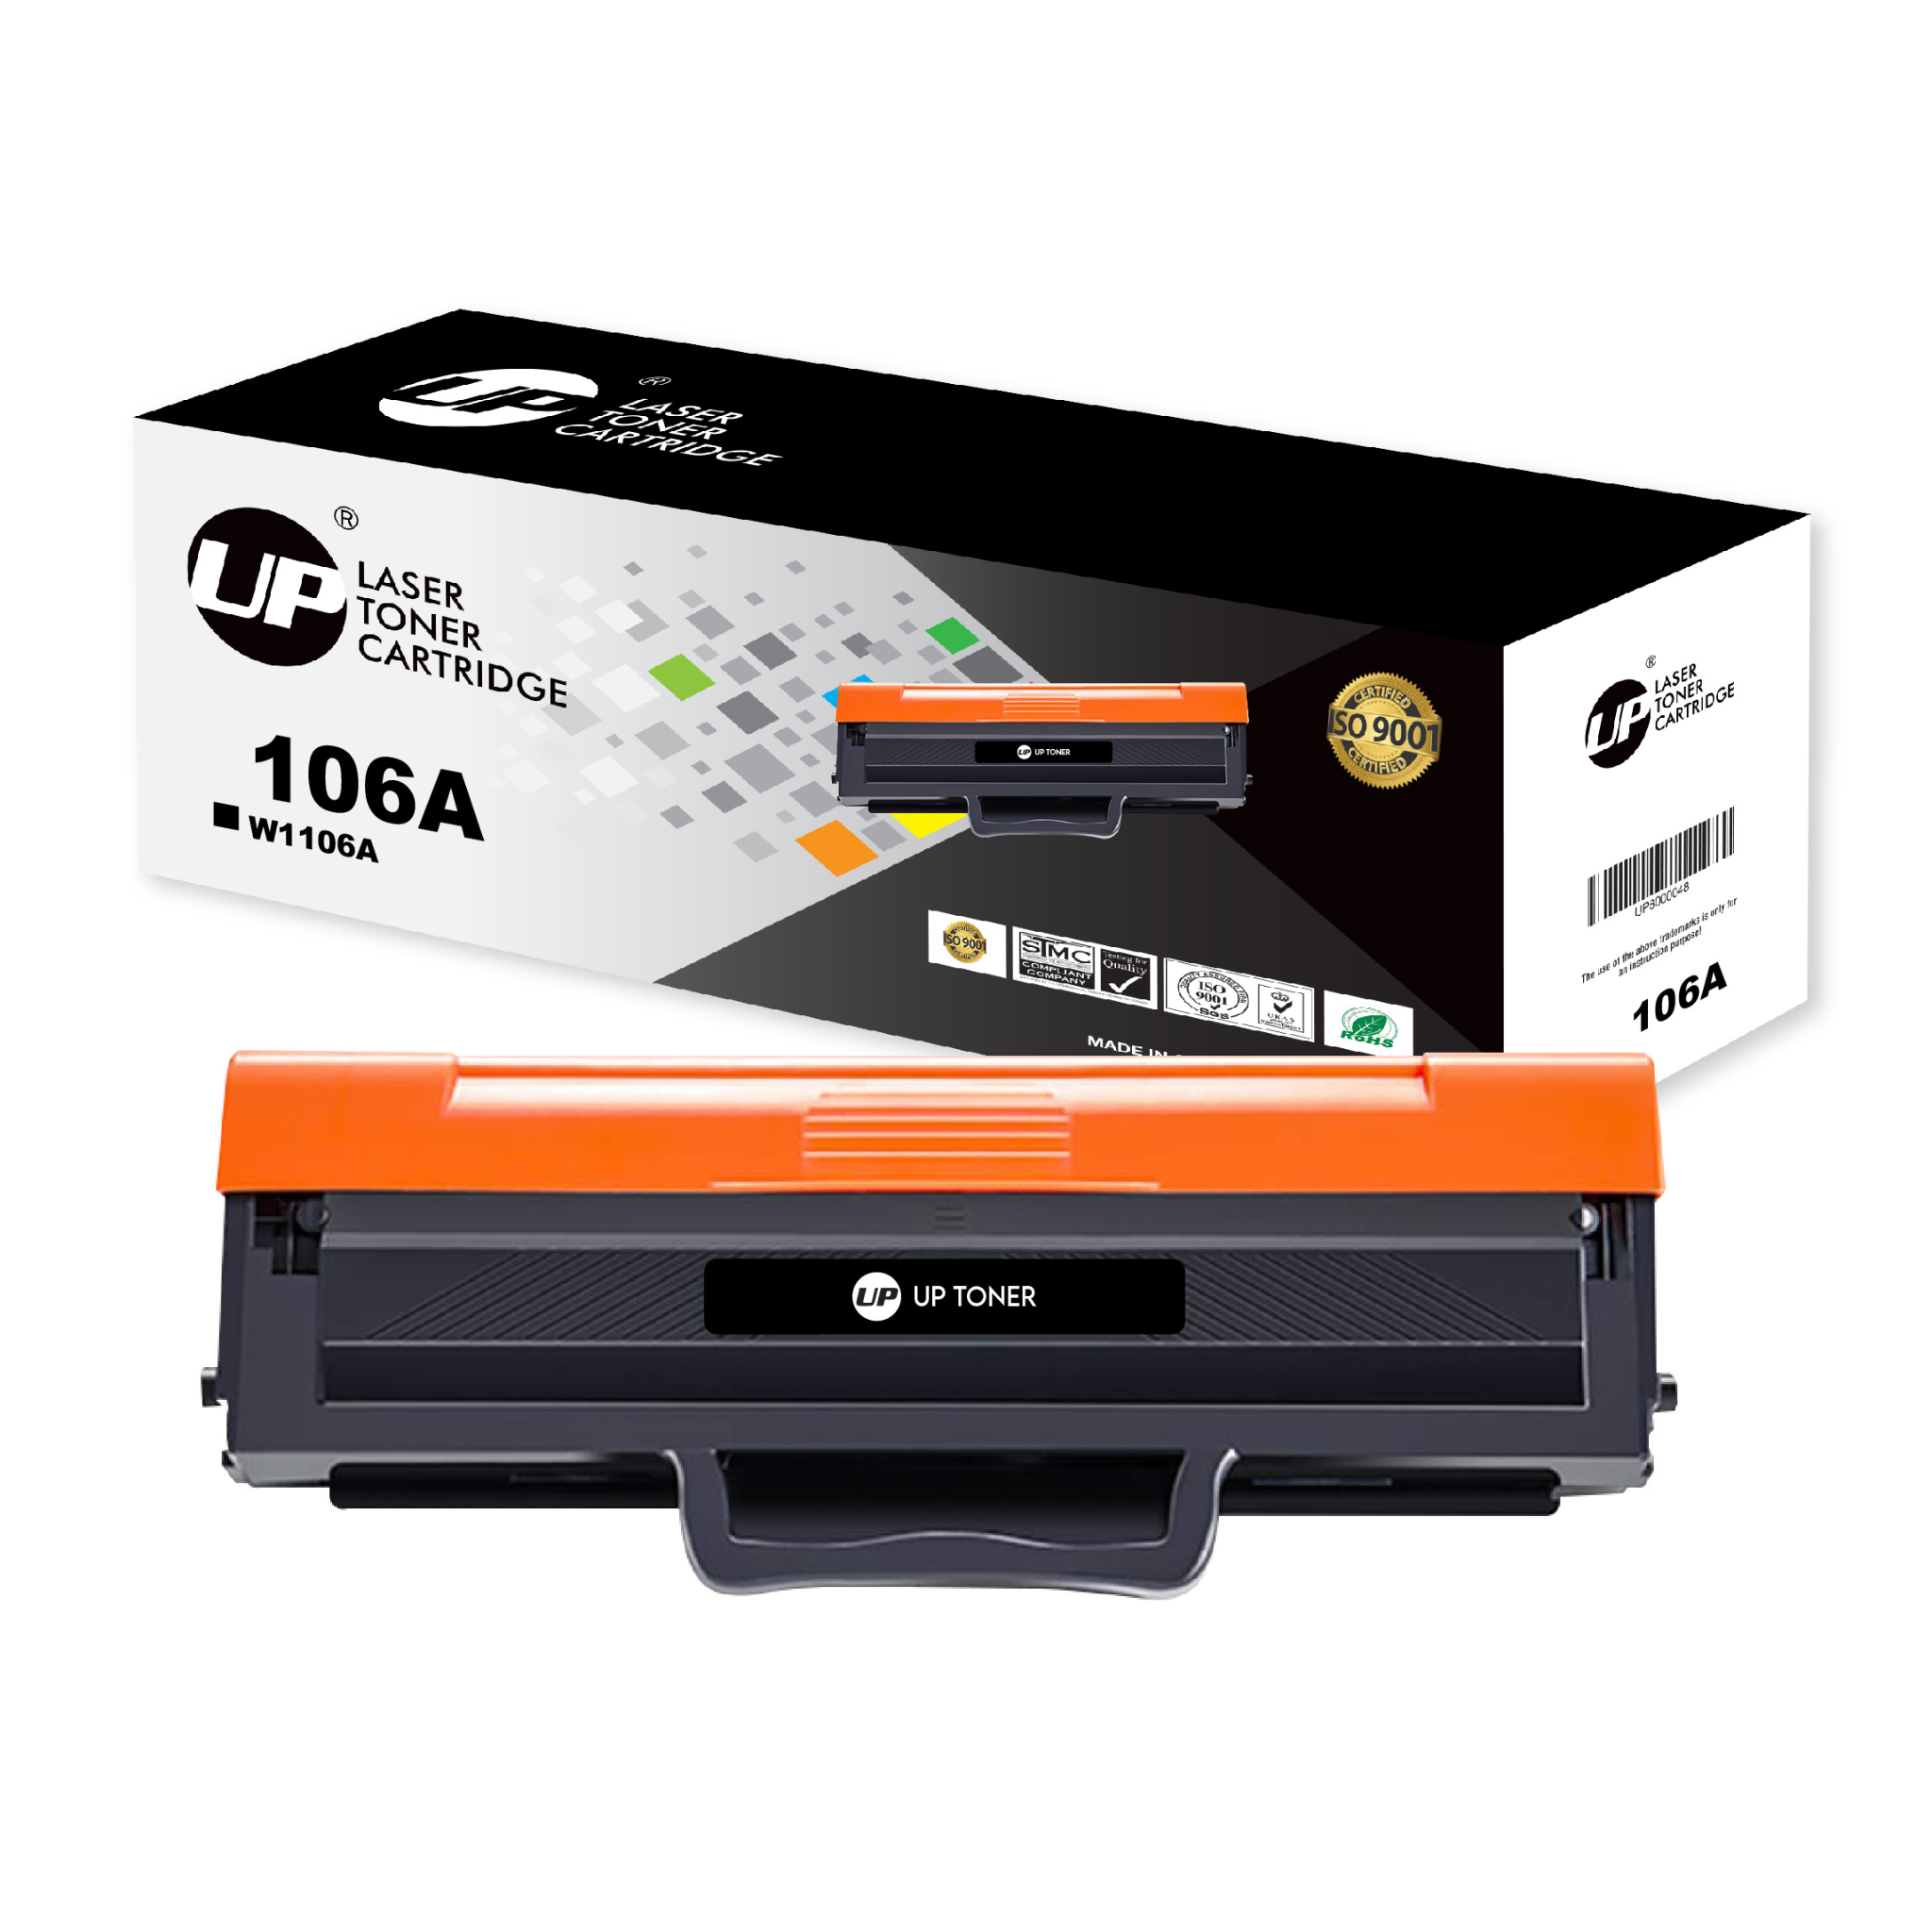 UP TONER 106A W1106A WITH CHIP BLK